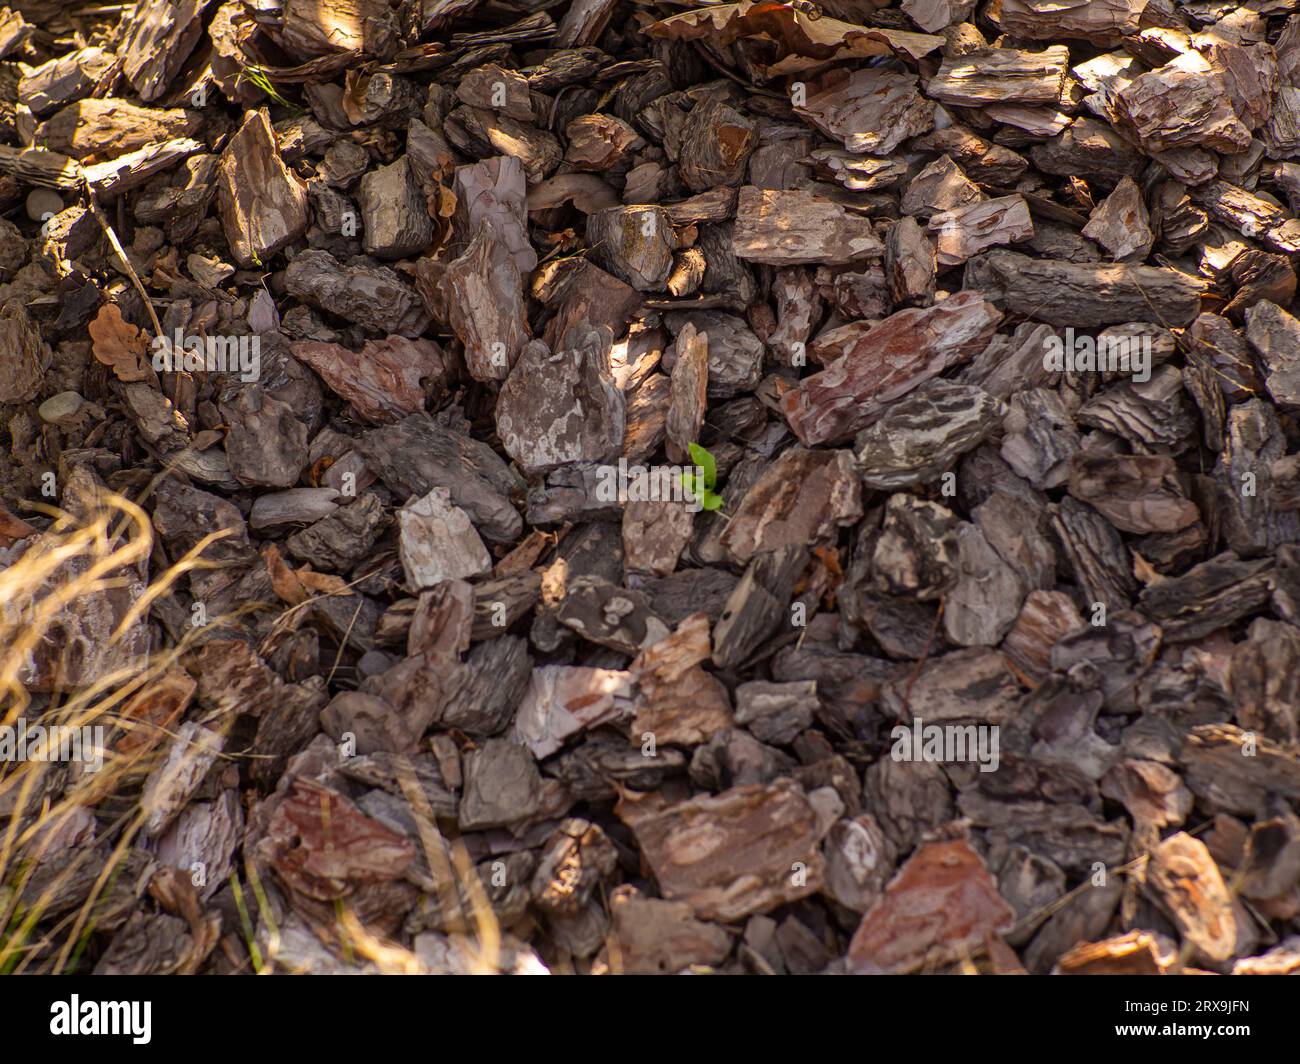 Texture of a pine bark mulch used for horticulture for preventing weed growth and enriching soil. Zero waste, organic gardening. Garden beds with pine Stock Photo